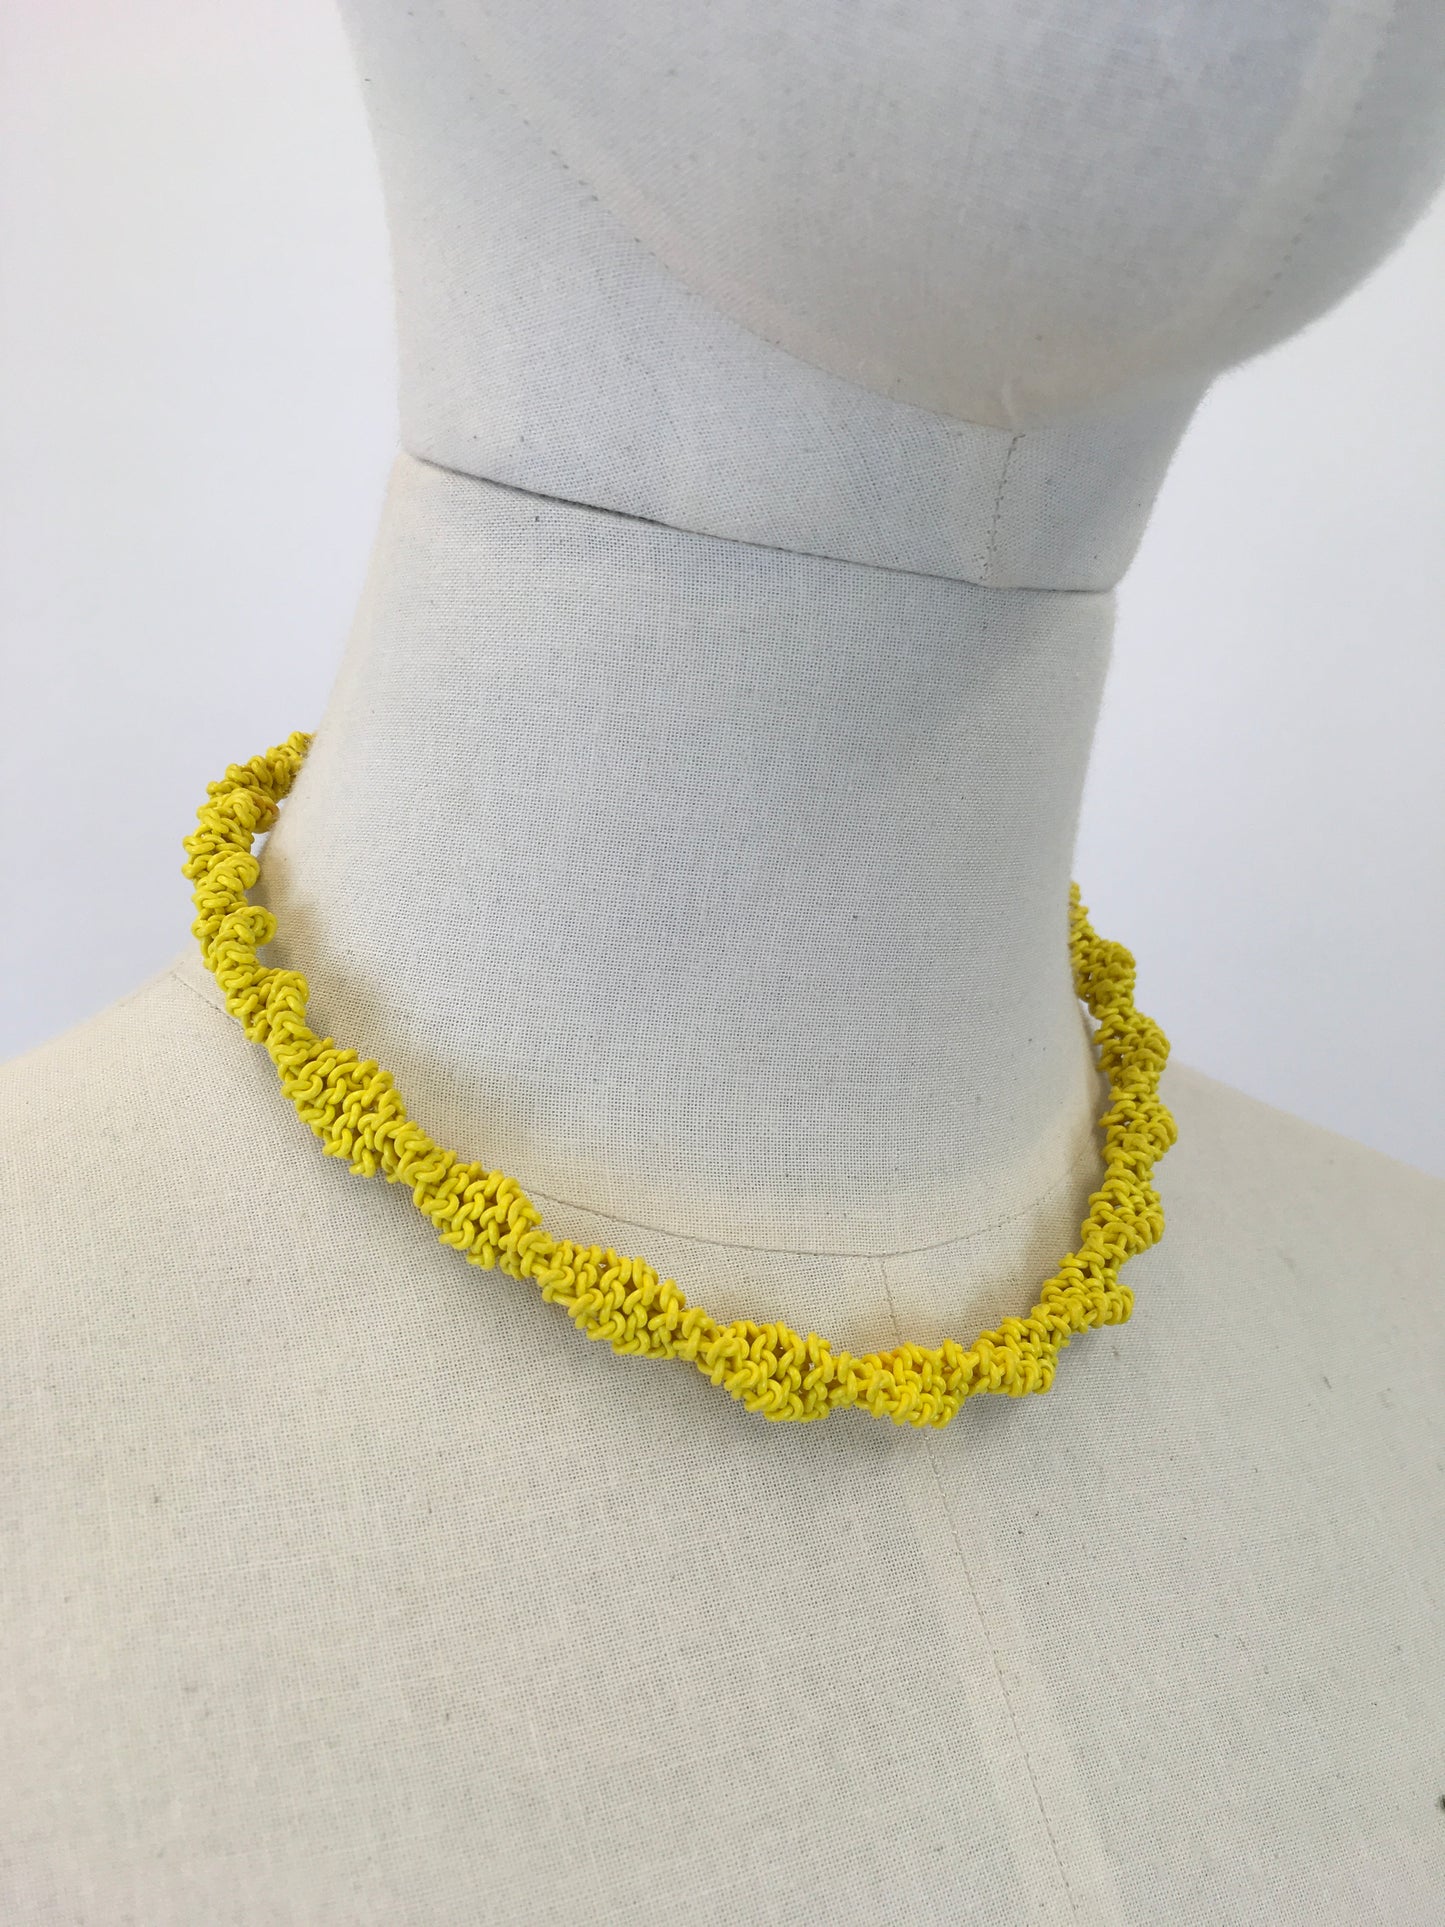 Original 1940’s Scoobie Necklace From Telephone Cord - In Sunshine Yellow